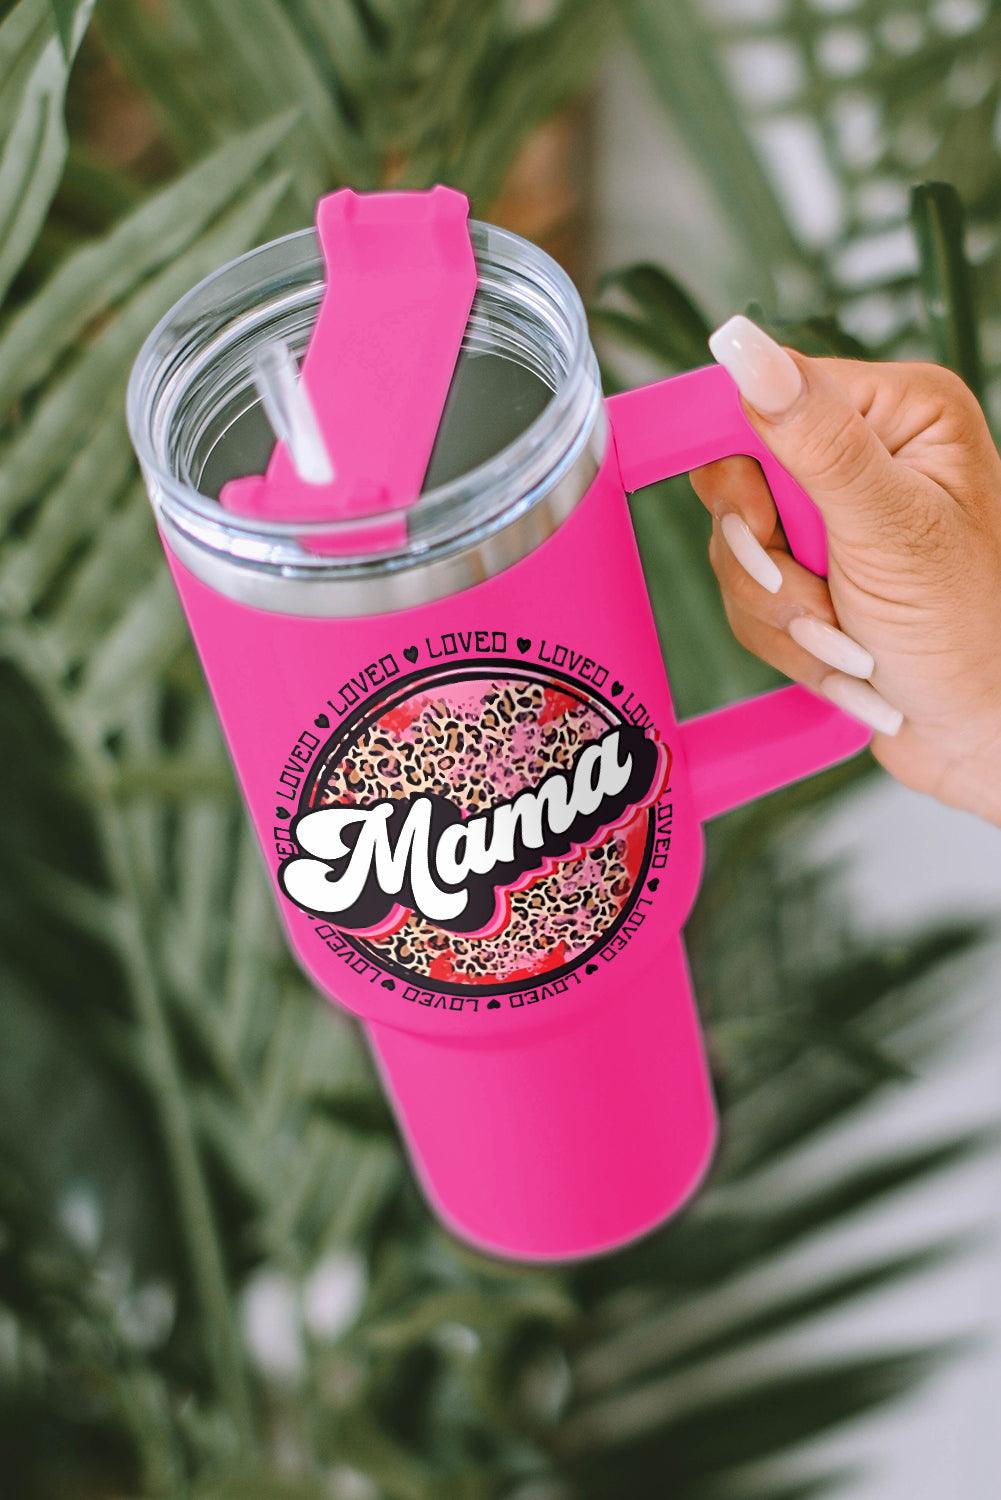 Rose Mama Leopard Stainless Steel Insulate Cup with Handle - God's Girl Gifts And Apparel